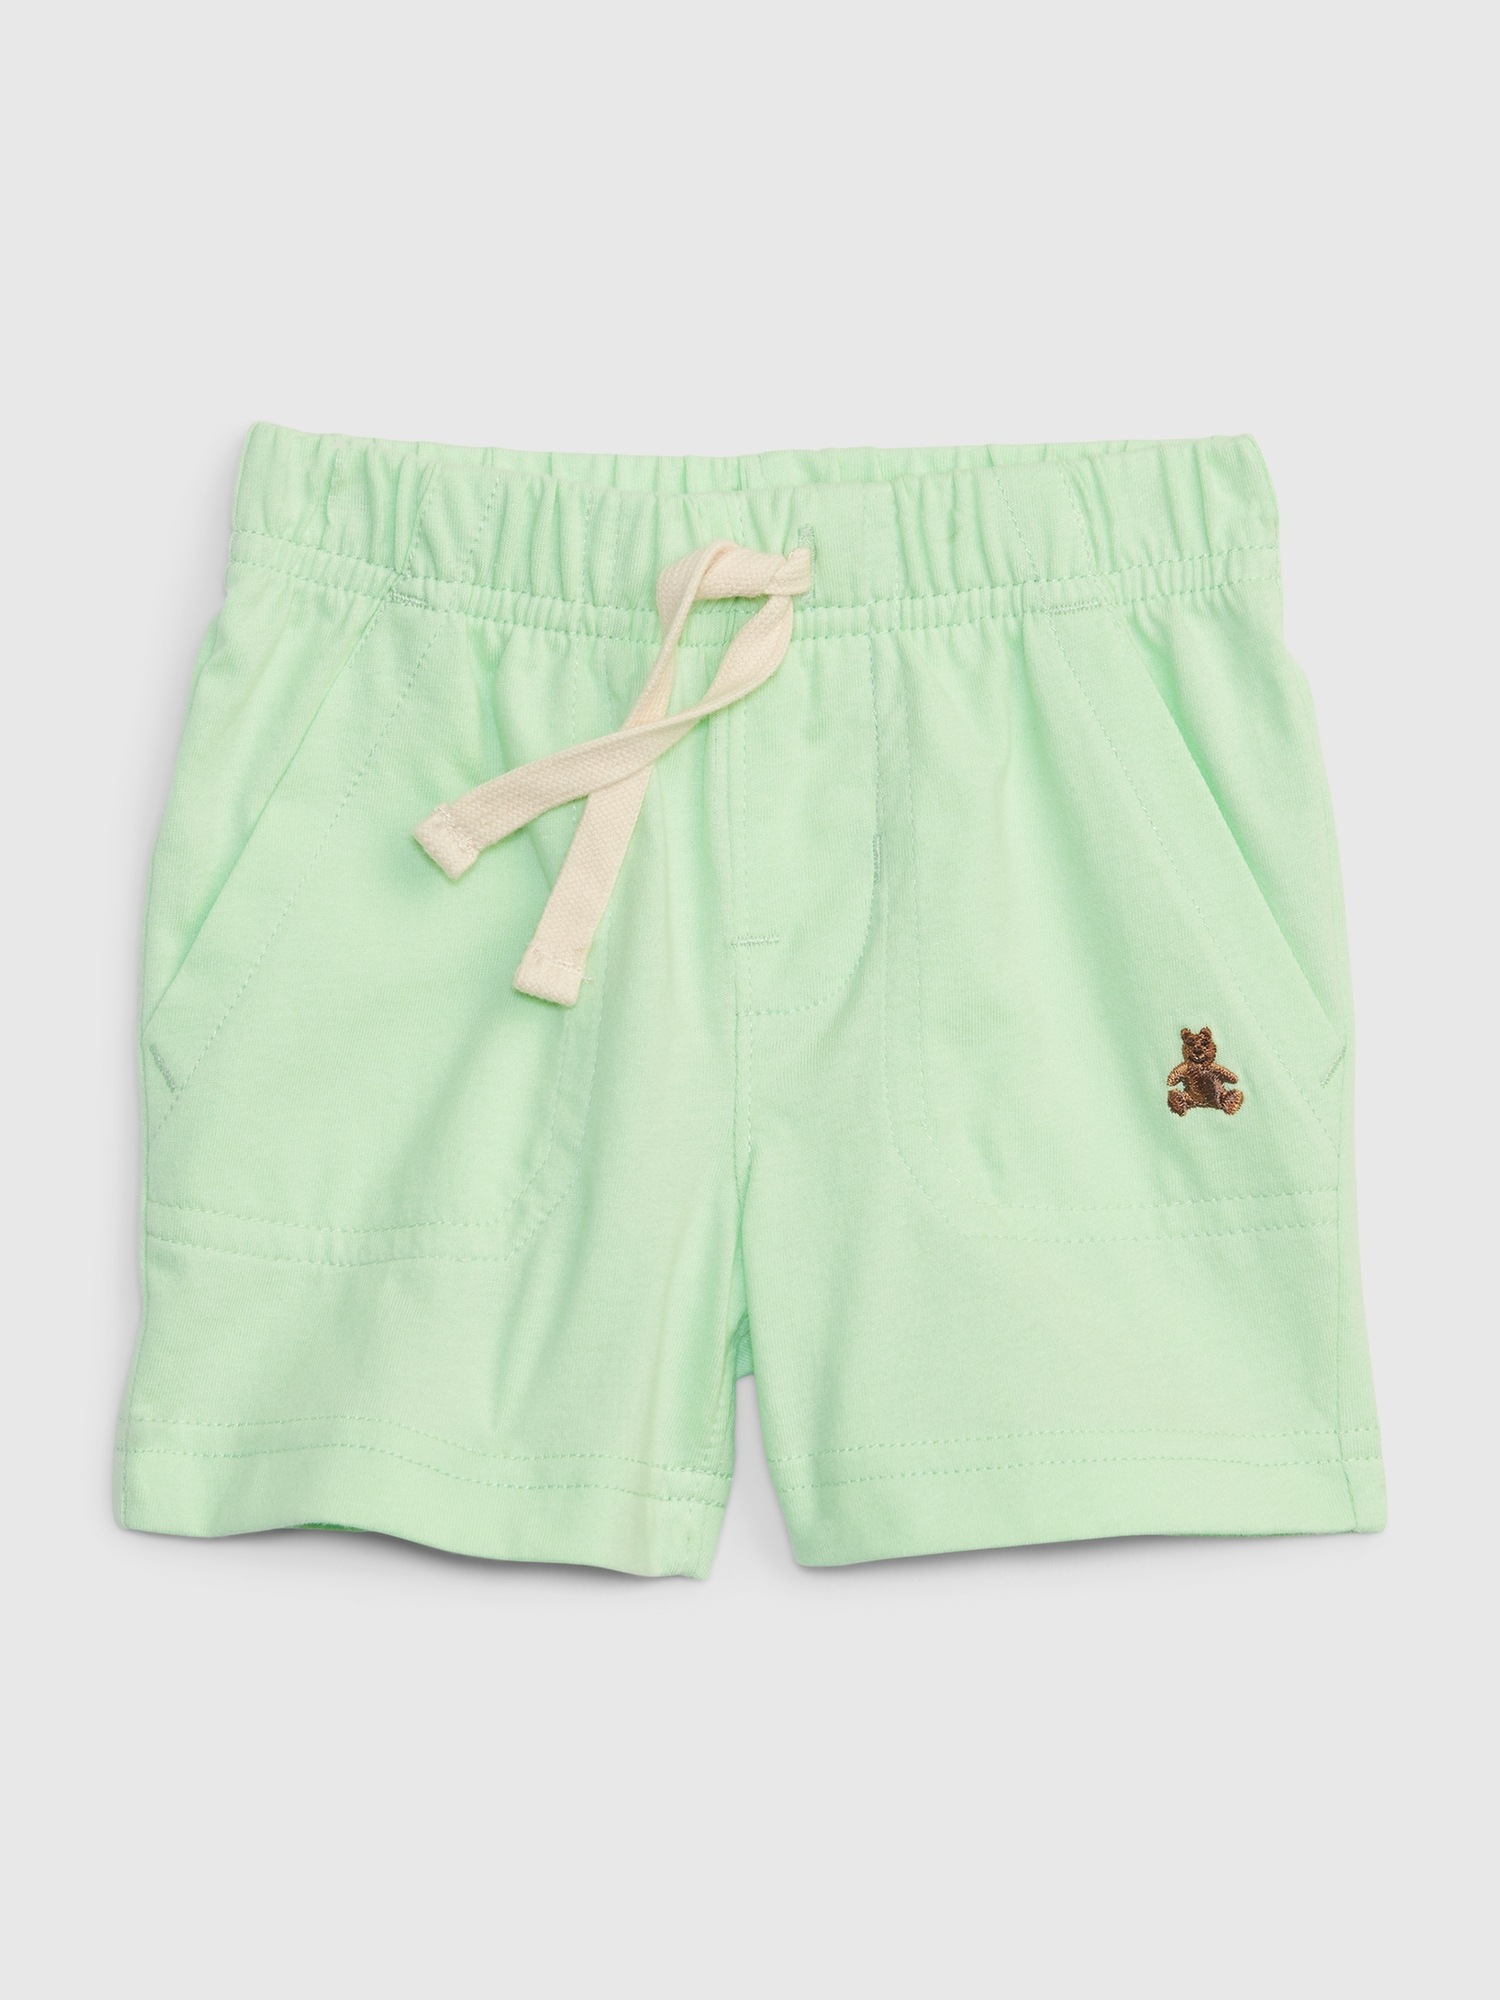 Gap Baby Organic Cotton Mix and Match Pull-On Shorts green. 1